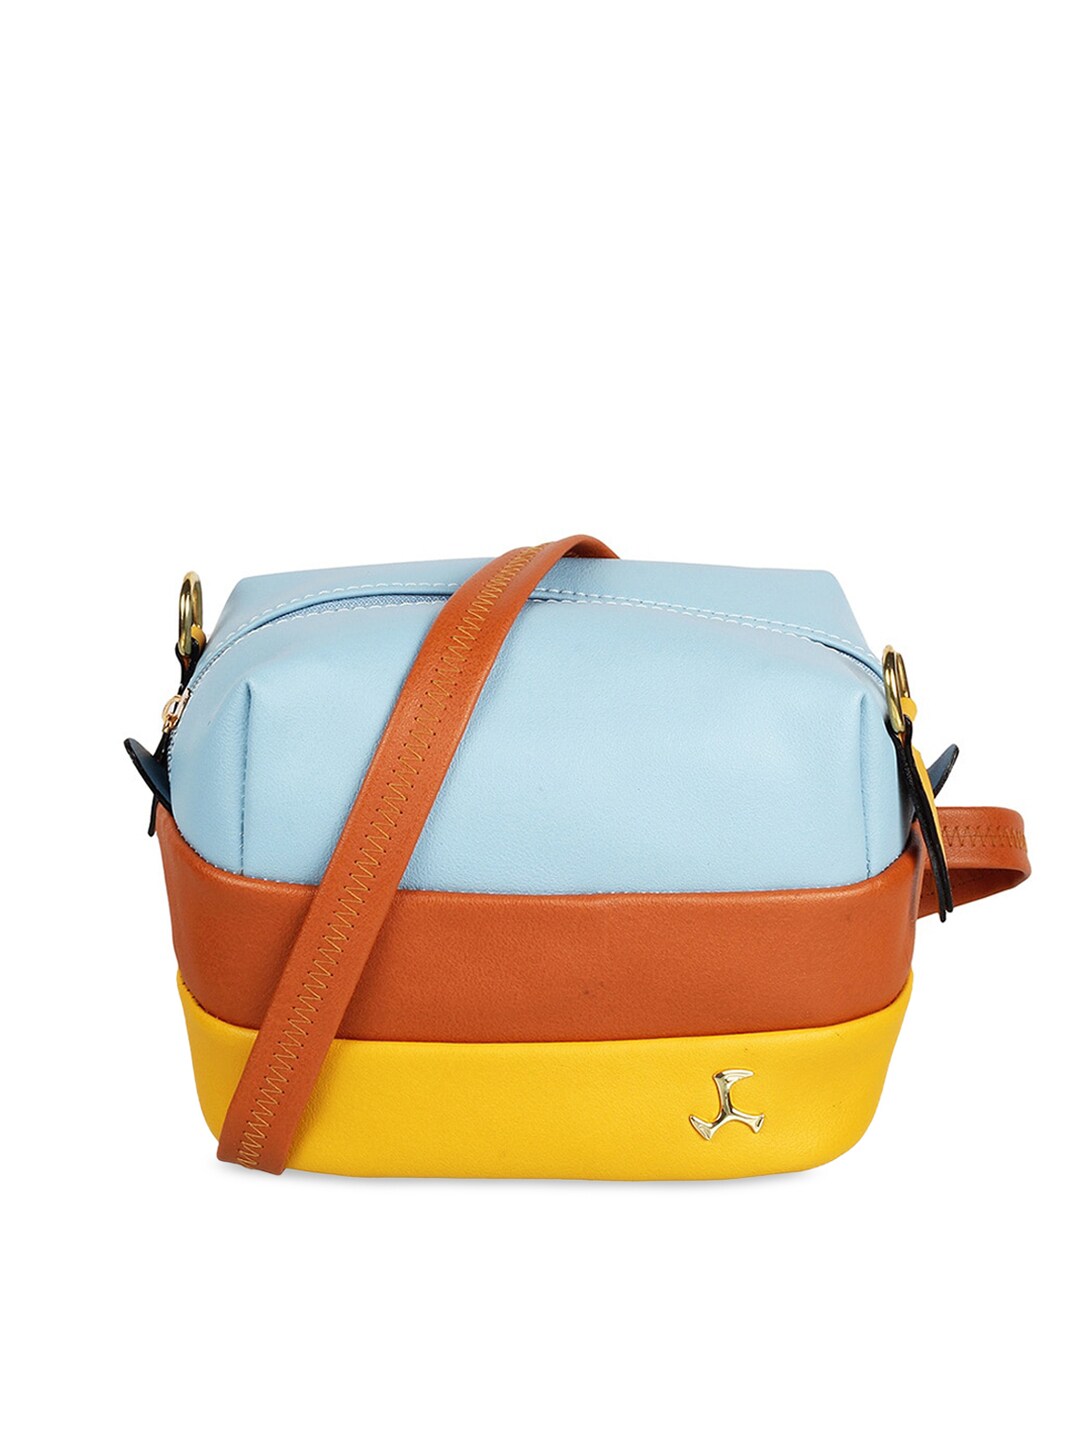 Mochi Blue Colourblocked PU Structured Sling Bag Price in India